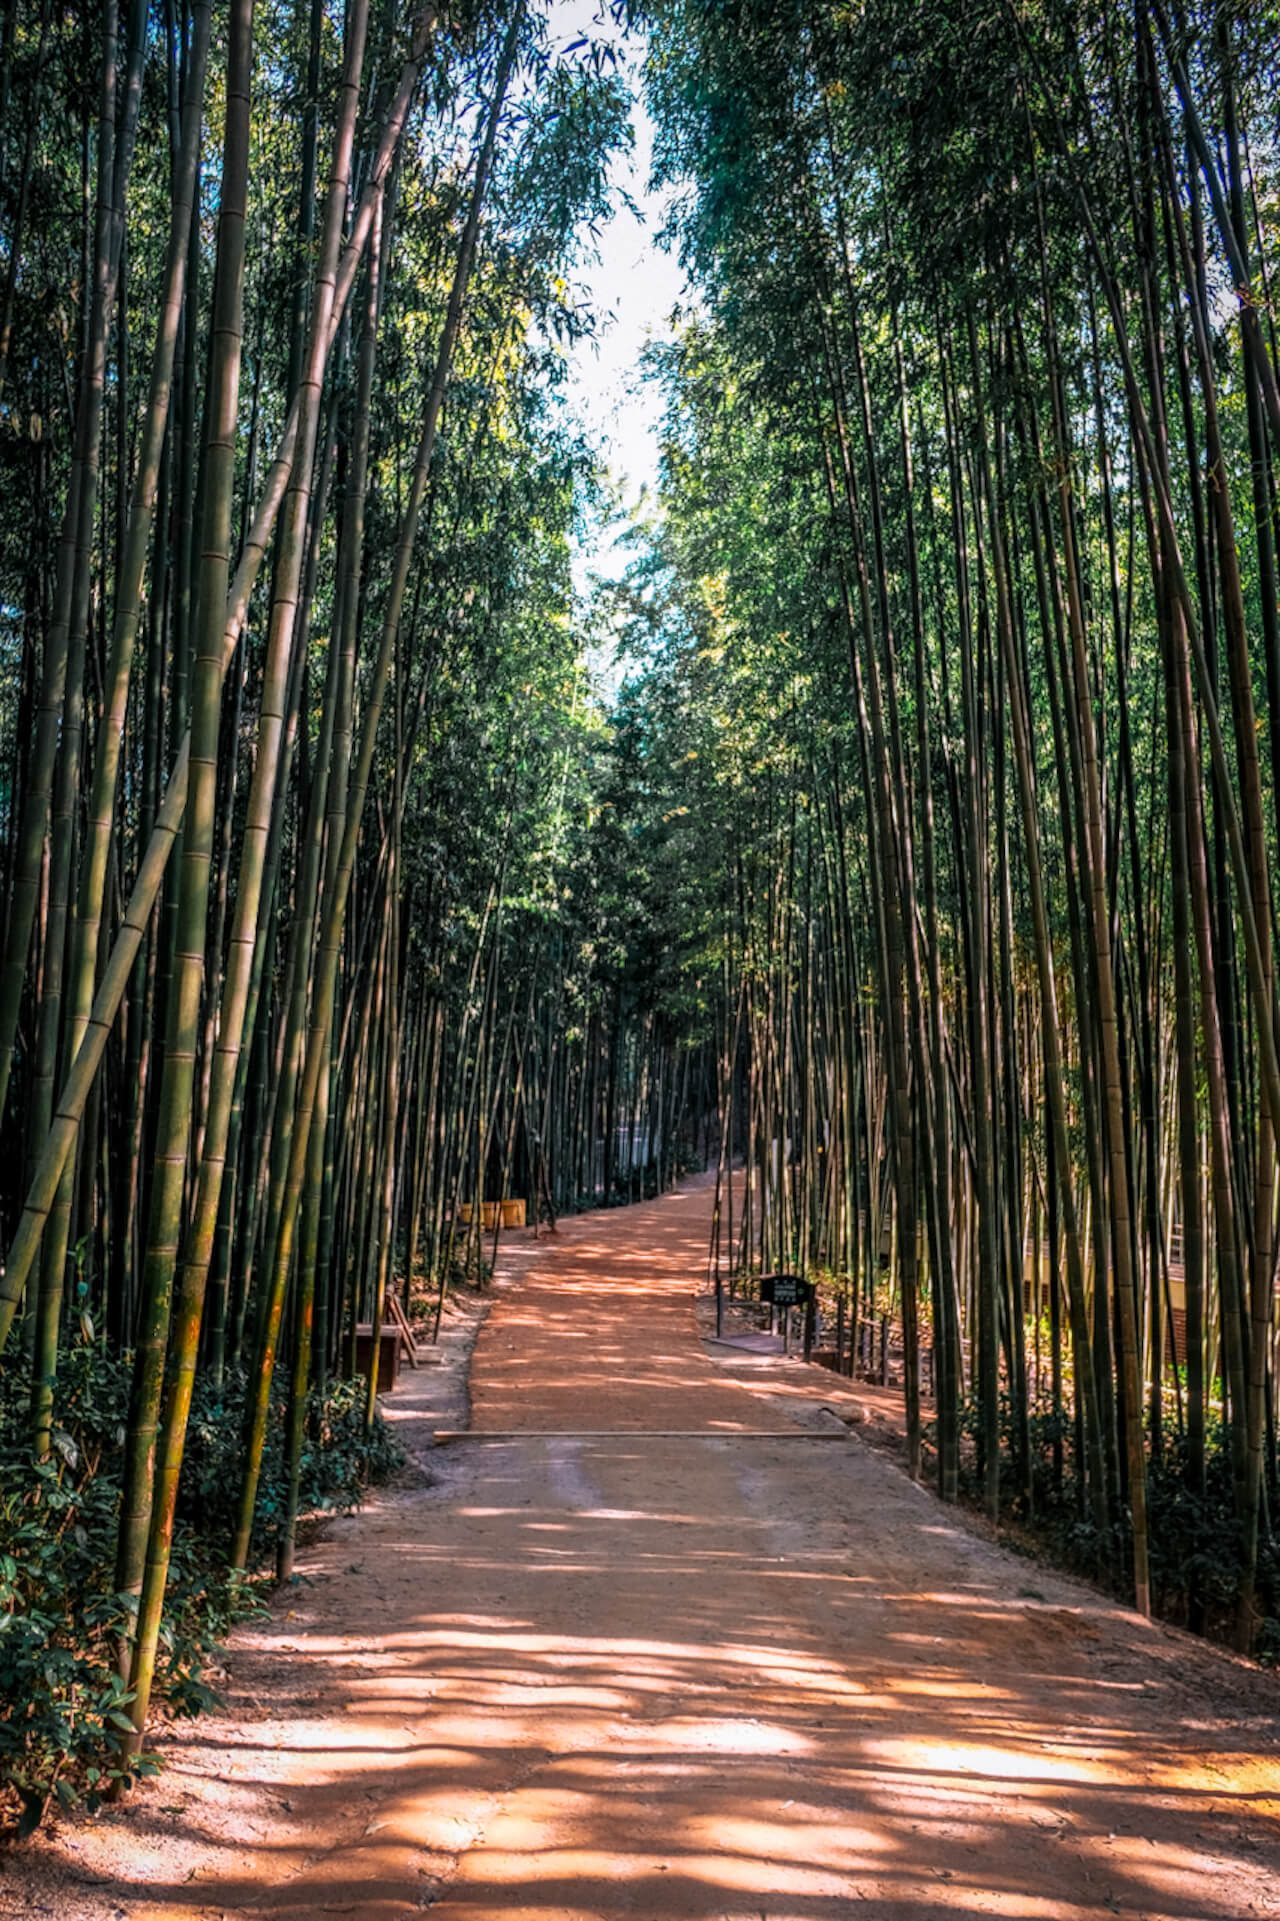 korea in may | damyang bamboo forest